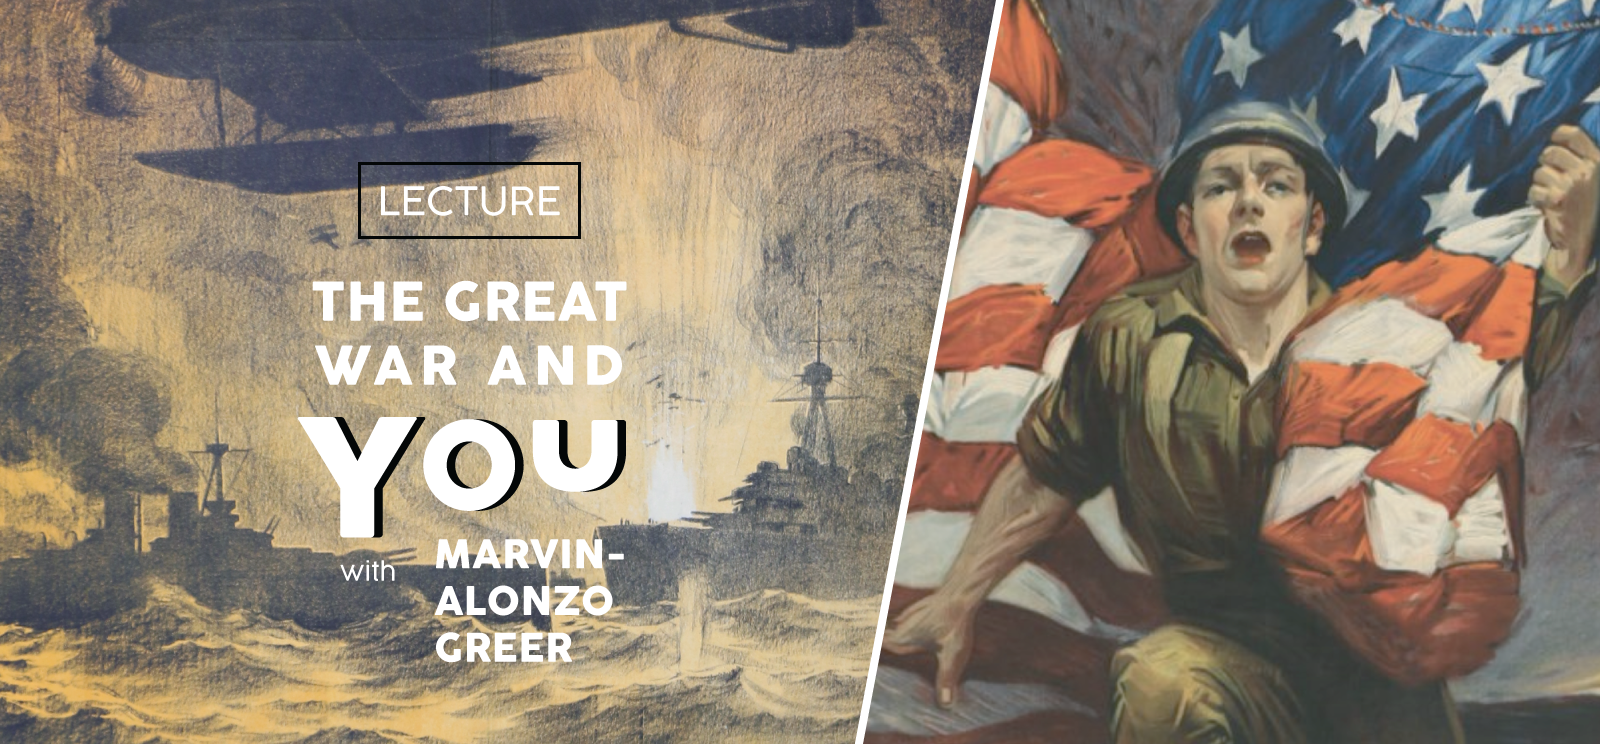 Left image: painting of a biplane flying over battleships in the ocean. Right image: white Doughboy marching toward the viewer carrying a US flag. Text: Lecture / The Great War and You / with Marvin-Alonzo Greer